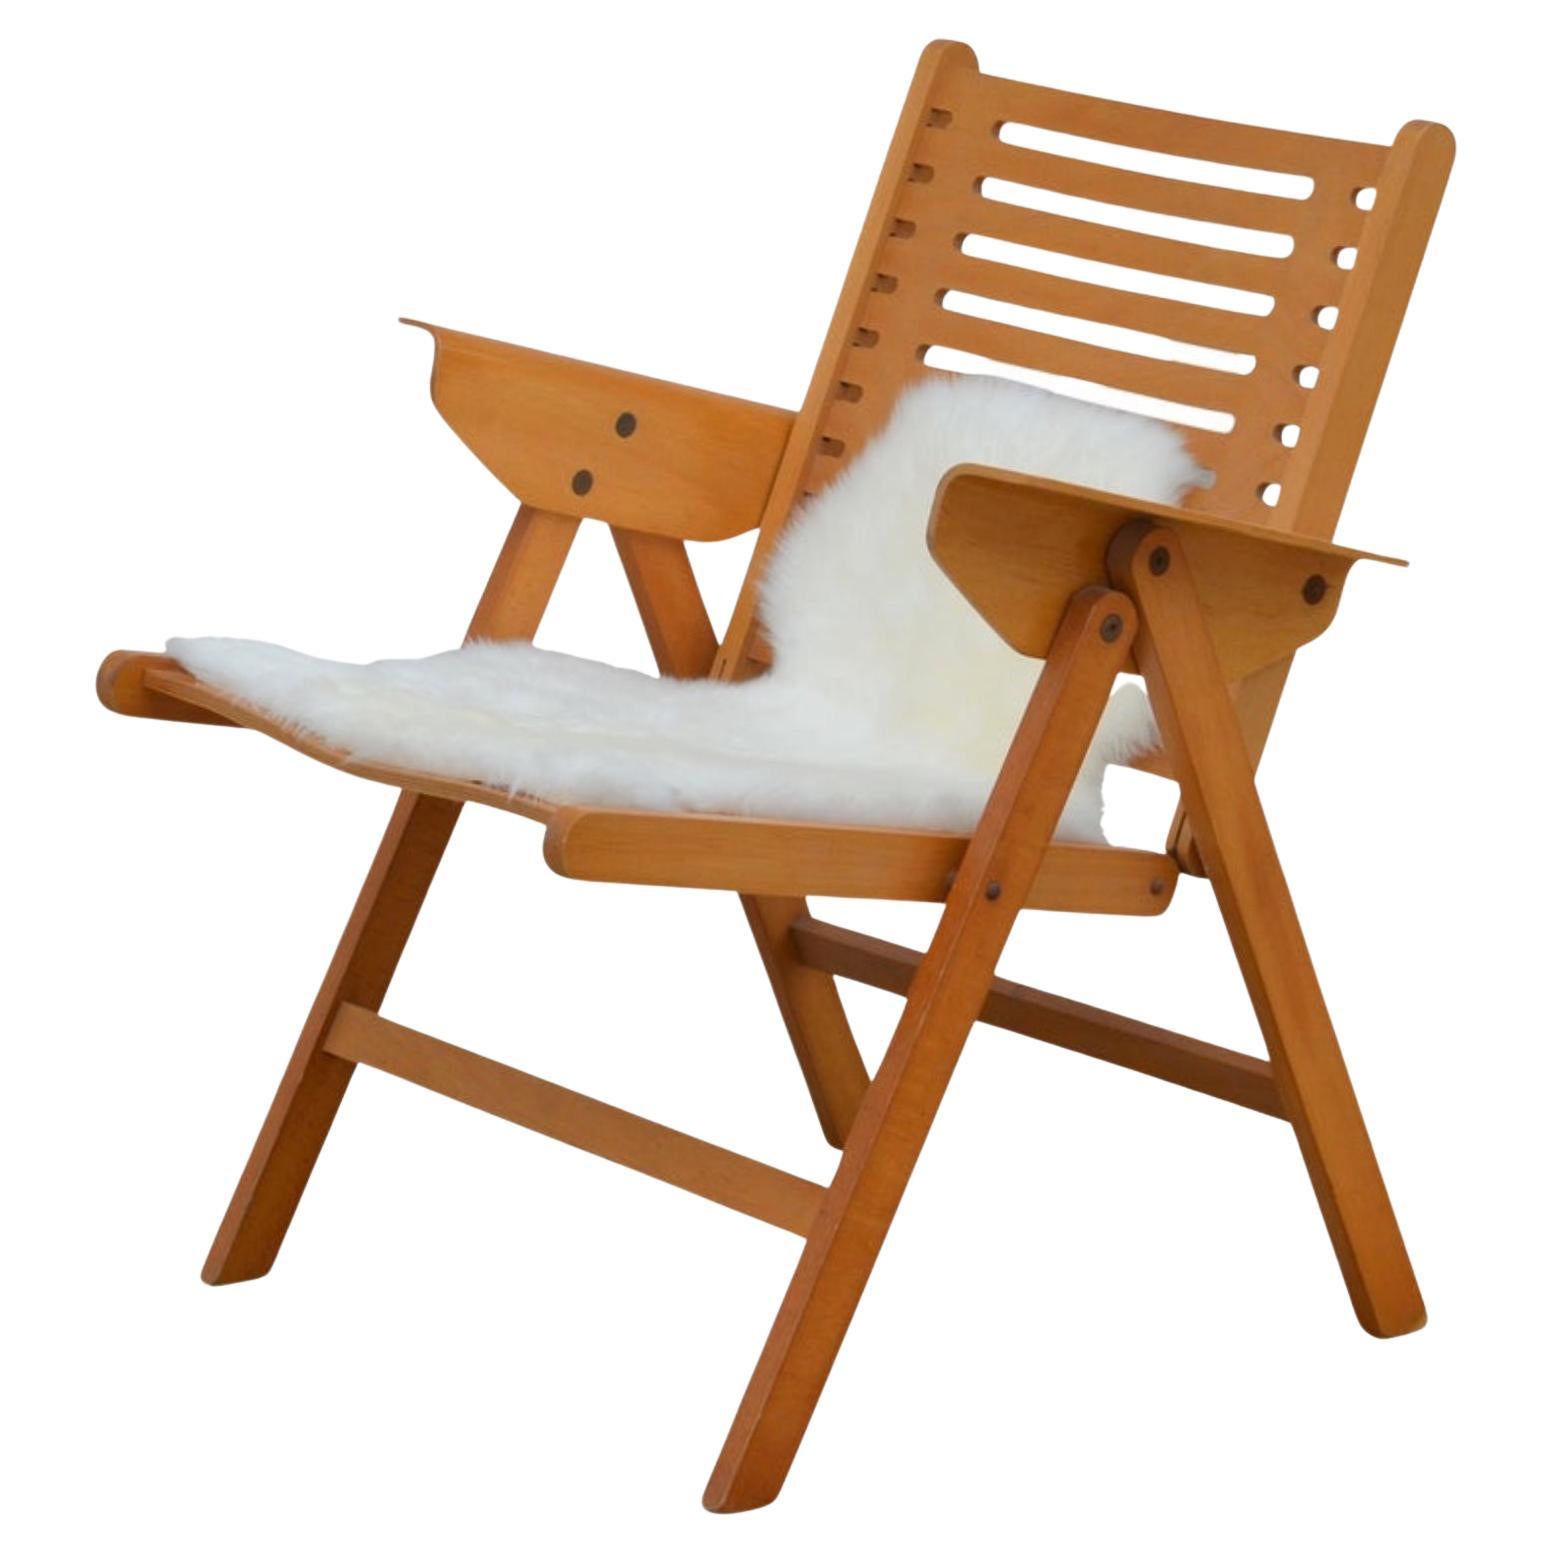 Iconic Vintage Folding Rex Lounge Chair by Niko Kralj For Sale at 